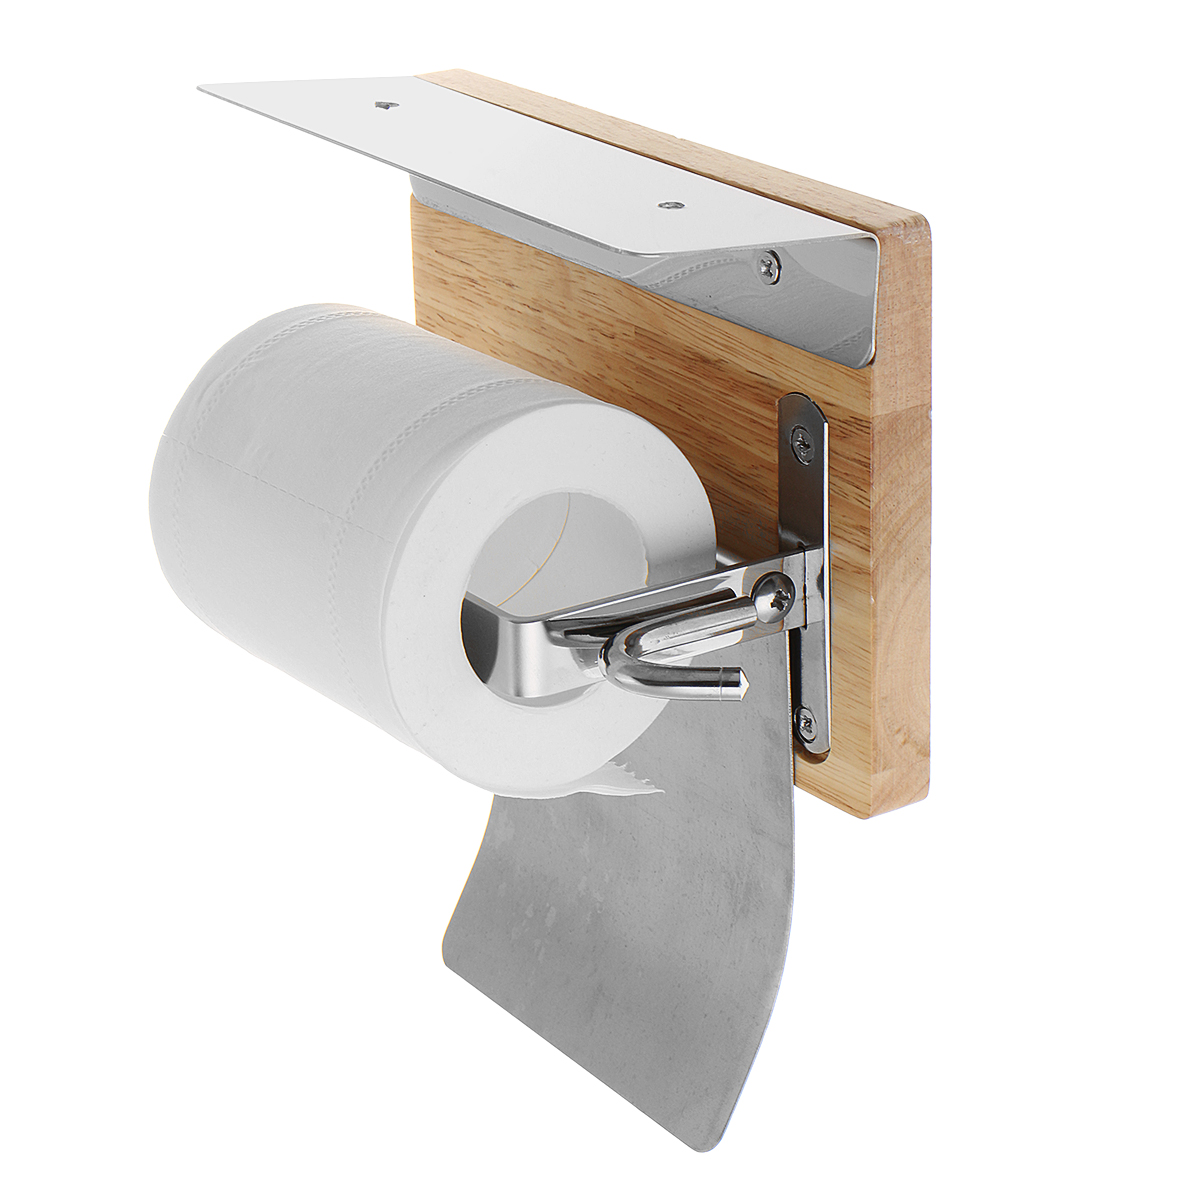 304-Stainless-Steel-Bathroom-Toilet-Tissue-Paper-Rack-Shelf-with-Mobile-Phone-Tray-1787595-6